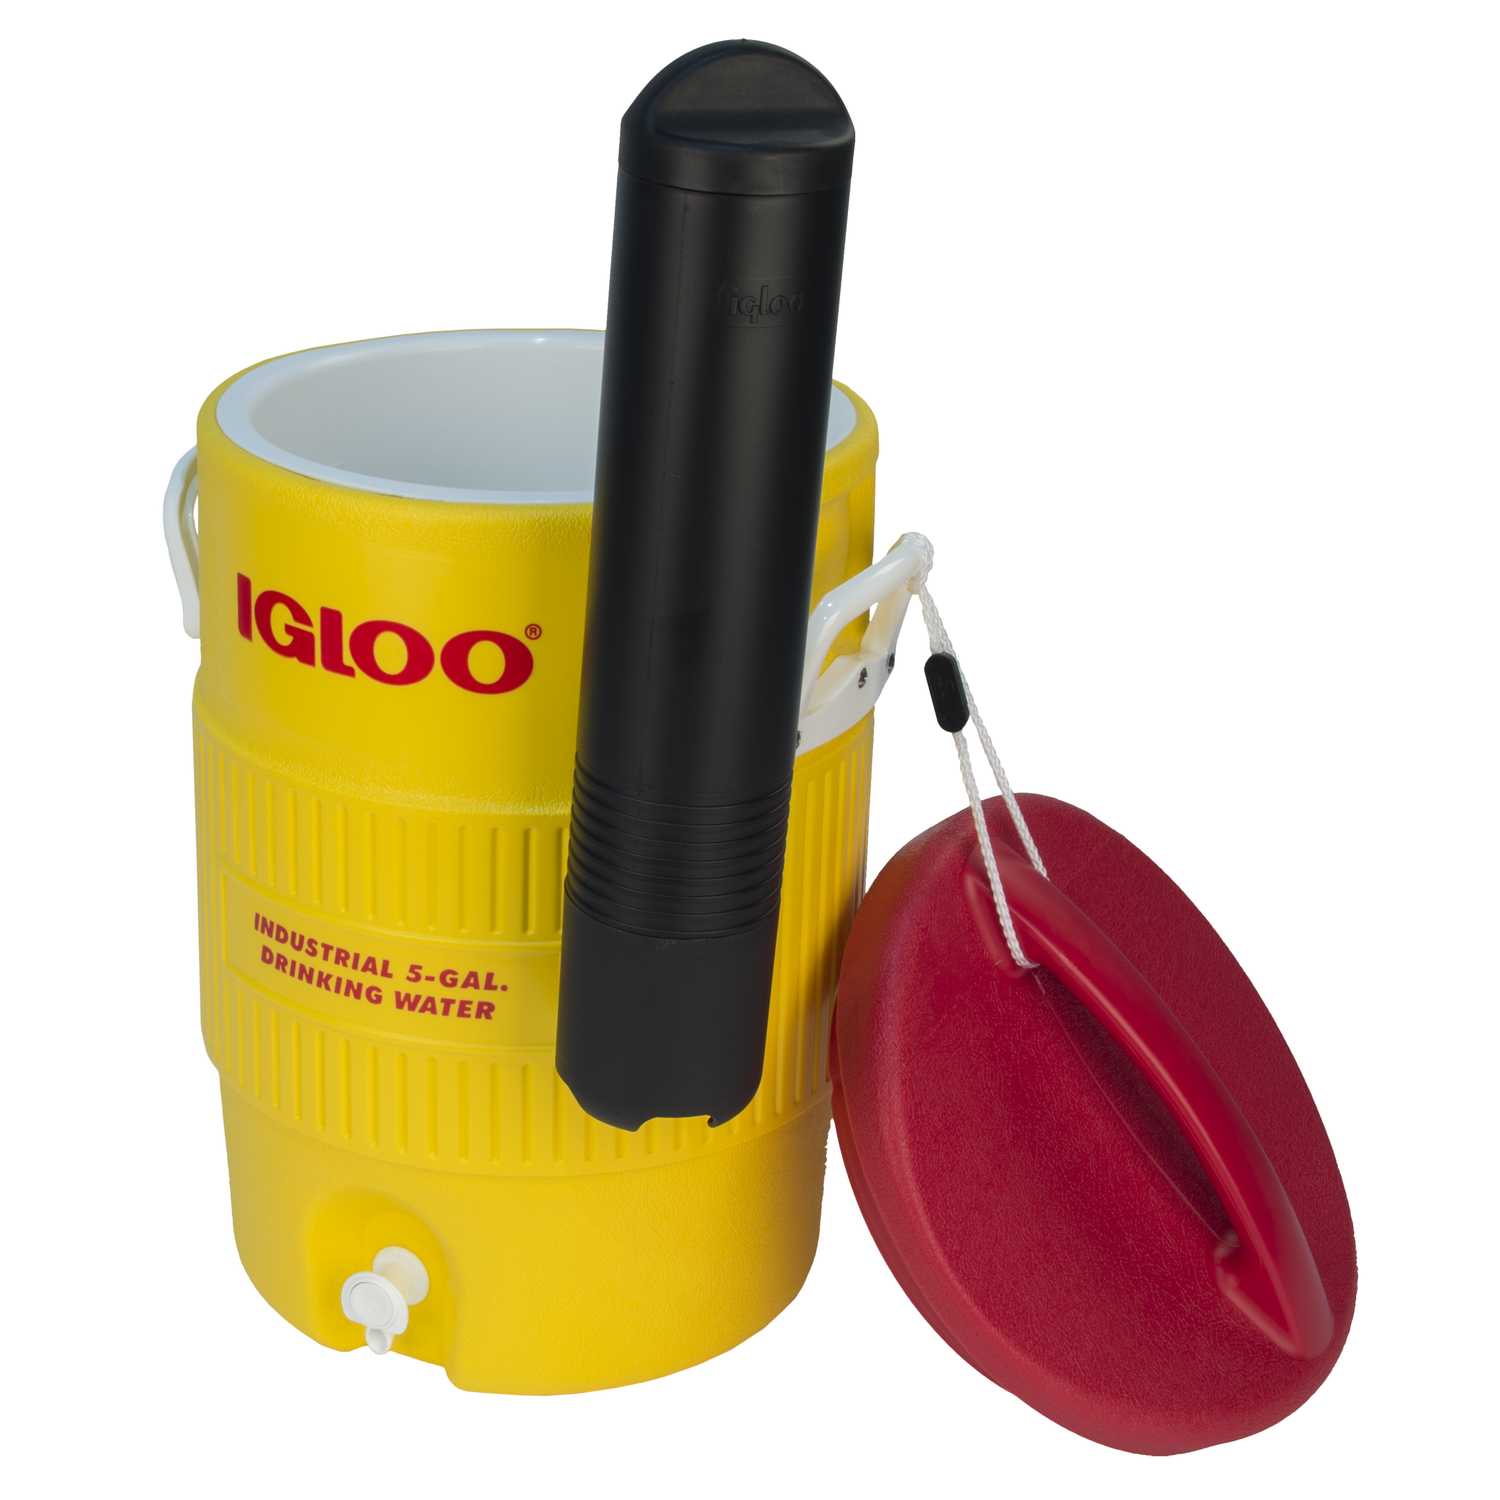 Igloo Water Cooler 5 gal. Red/Yellow Ace Hardware